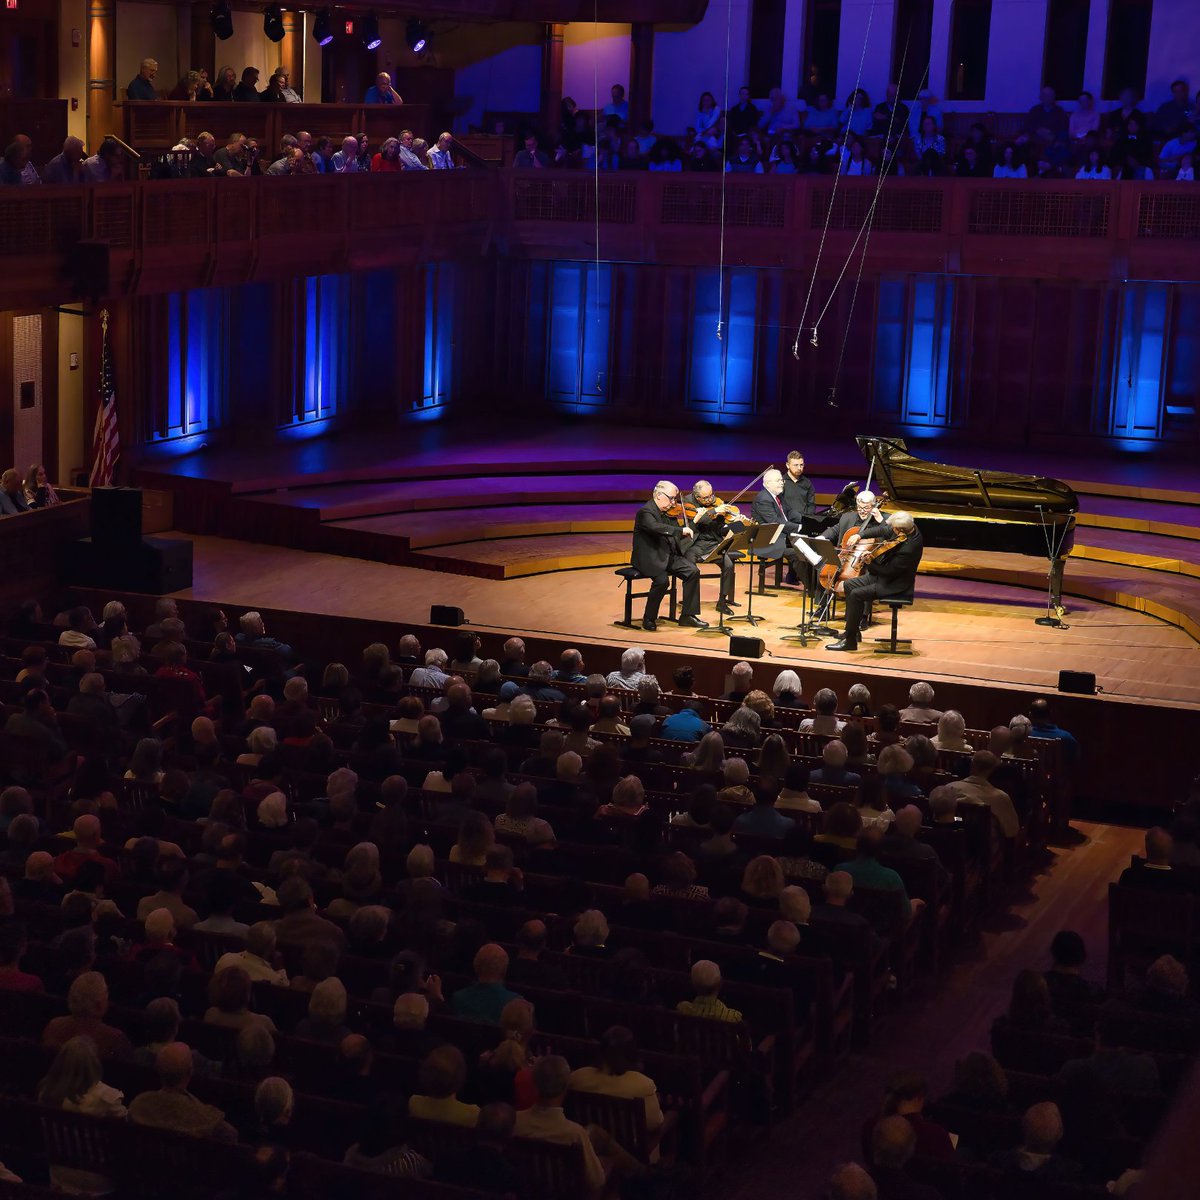 Goodbye, Tanglewood! Thank you to Emanuel Ax for joining us once again for a beautiful performance of Dvořák’s Piano Quintet. 📸: Hilary Scott / Tanglewood